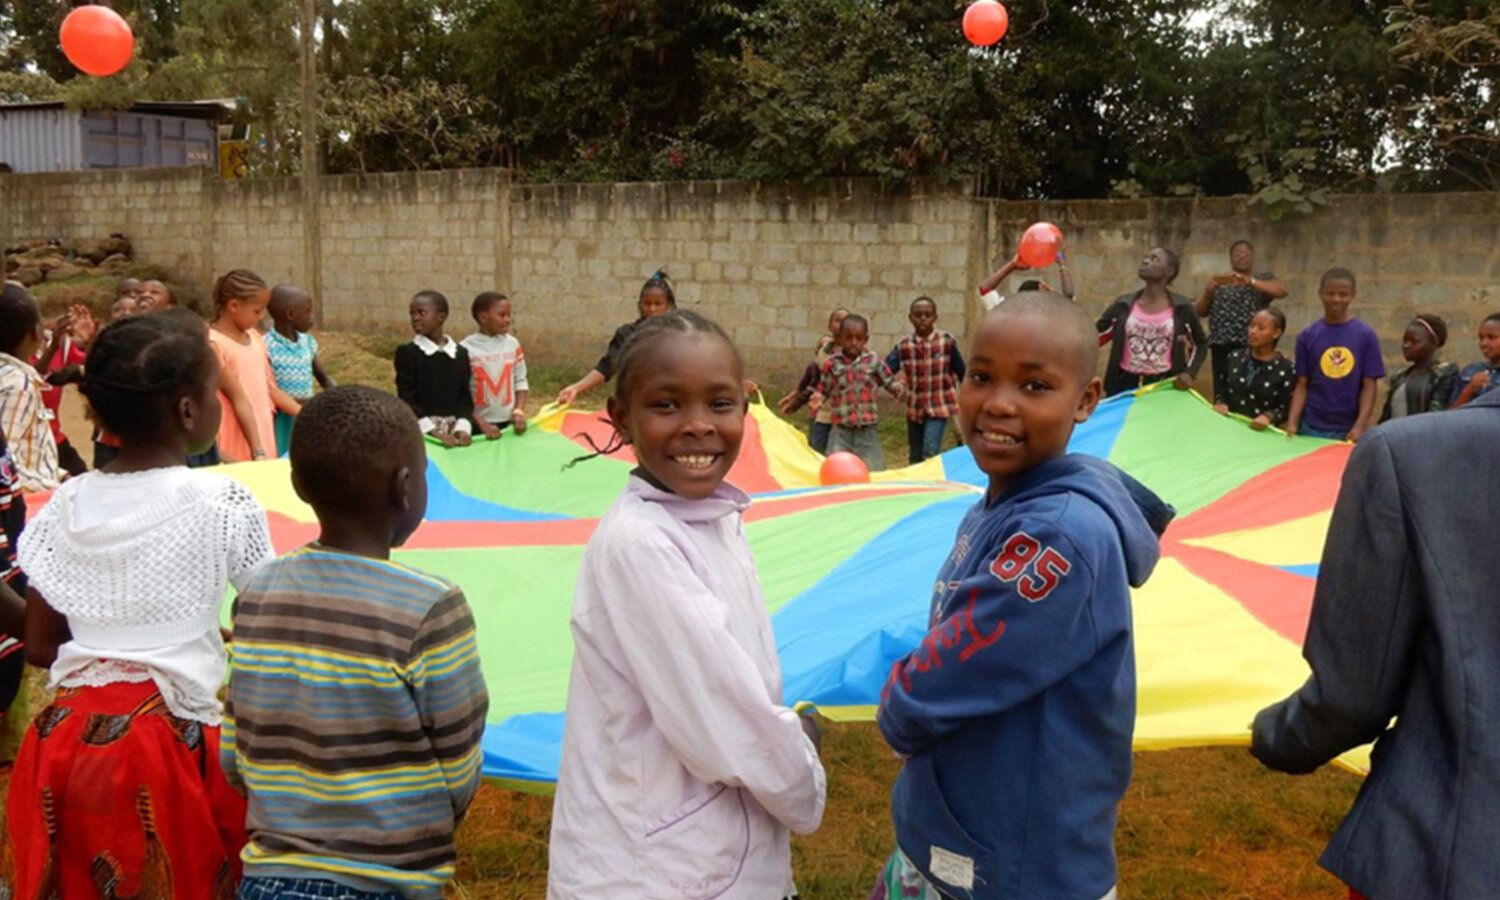   The Riruta Shade Orphanage children had a good time playing with a parachute brought by the TGE team.  